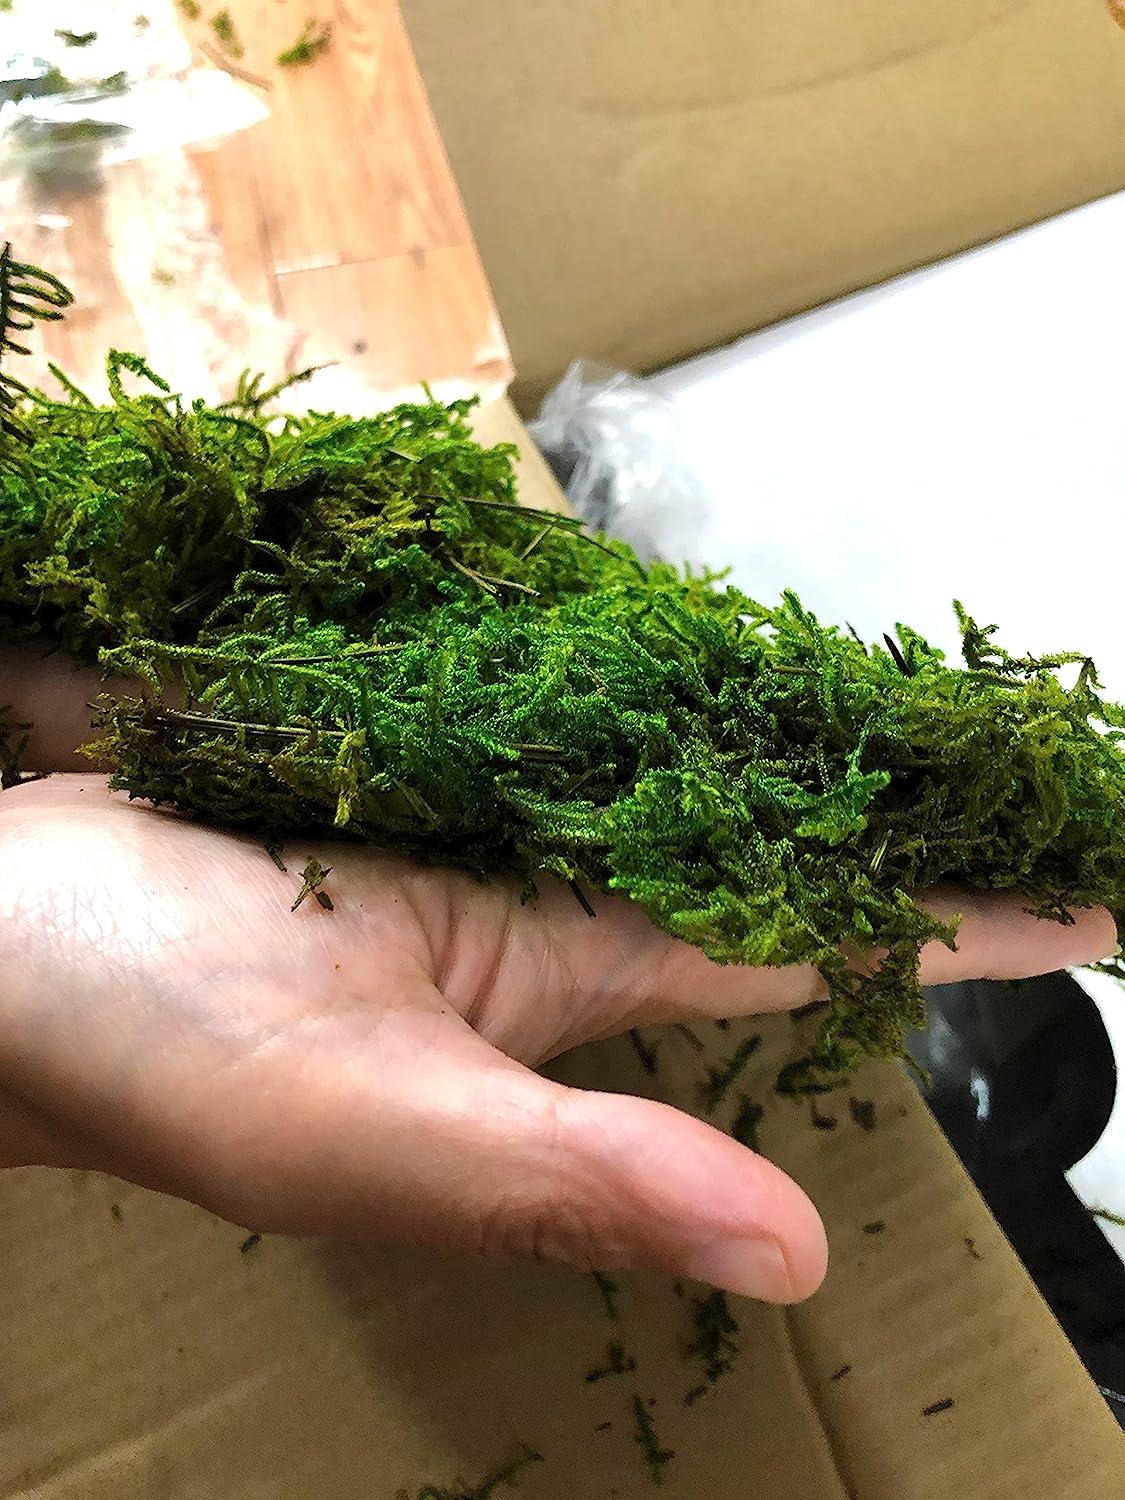 Natural Preserved Sheet Moss For Sale